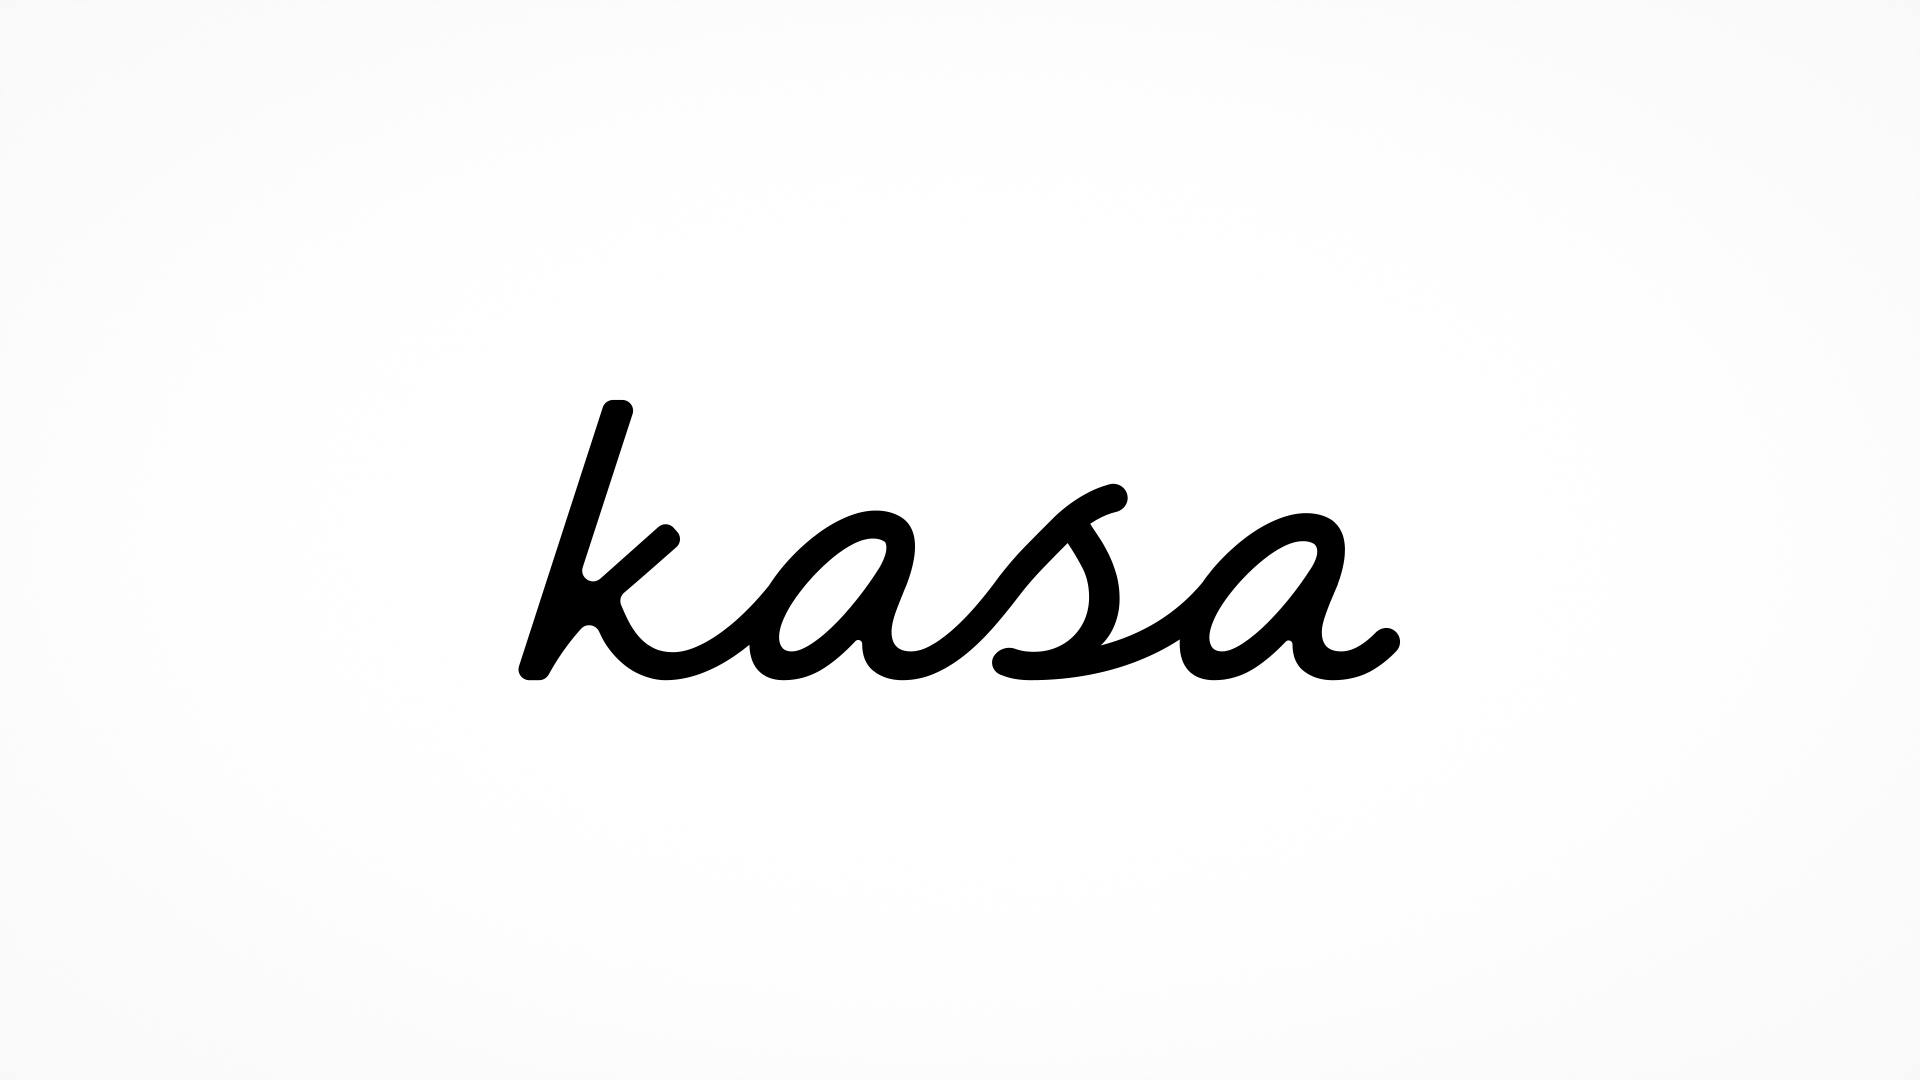 Launched the creative unit “KASA”